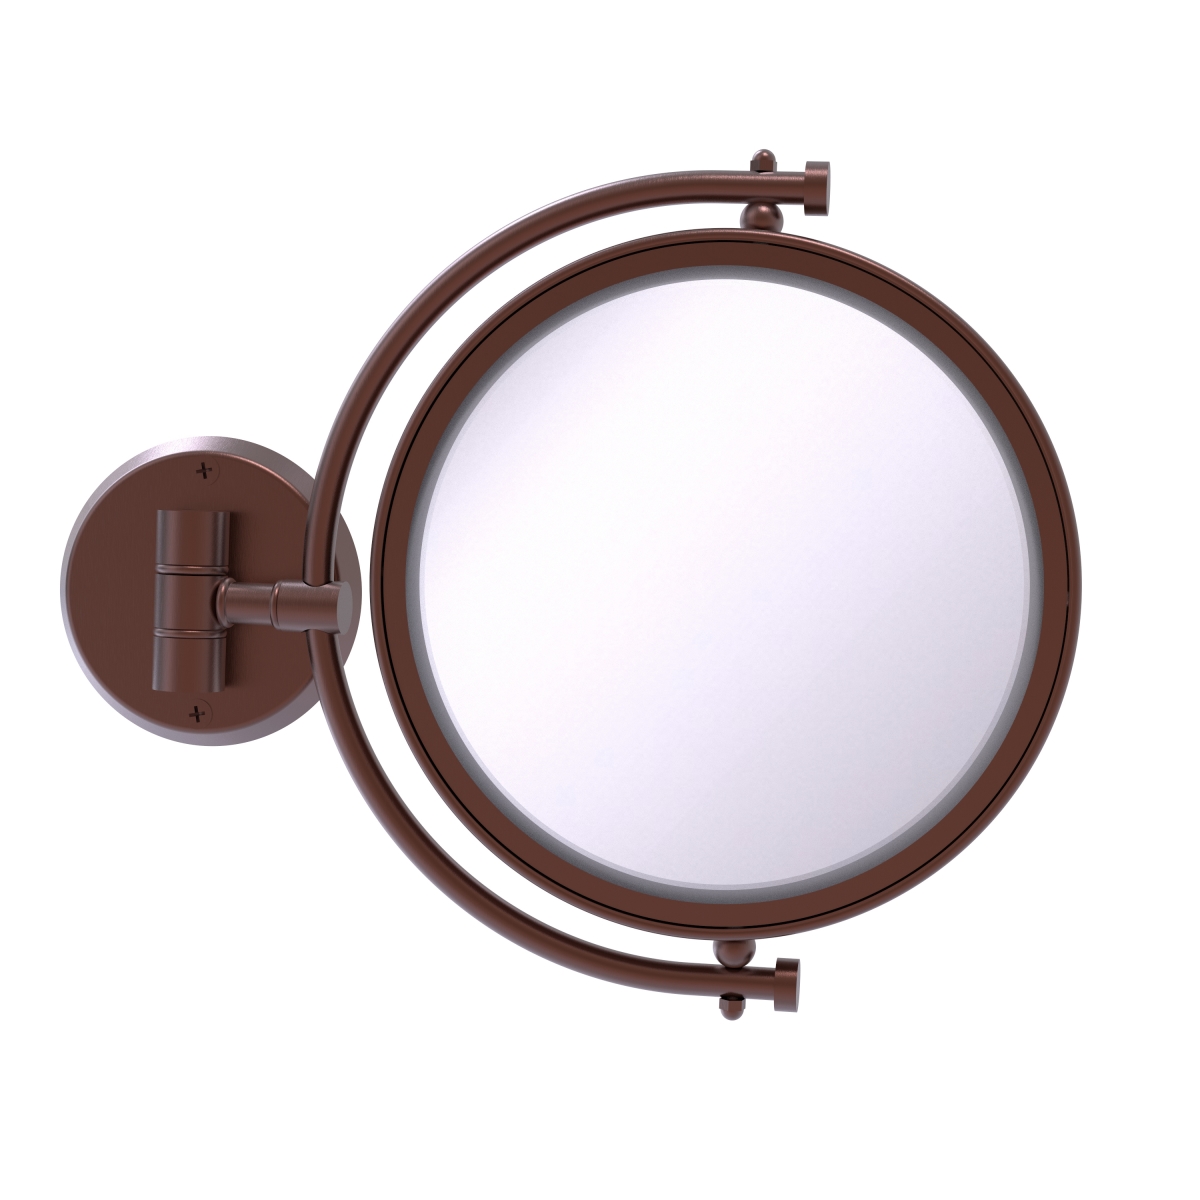 WM-4-3X-CA 8 in. Wall Mounted Make-Up Mirror 3X Magnification, Antique Copper - 10 x 8 x 8 in -  Allied Brass, WM-4/3X-CA